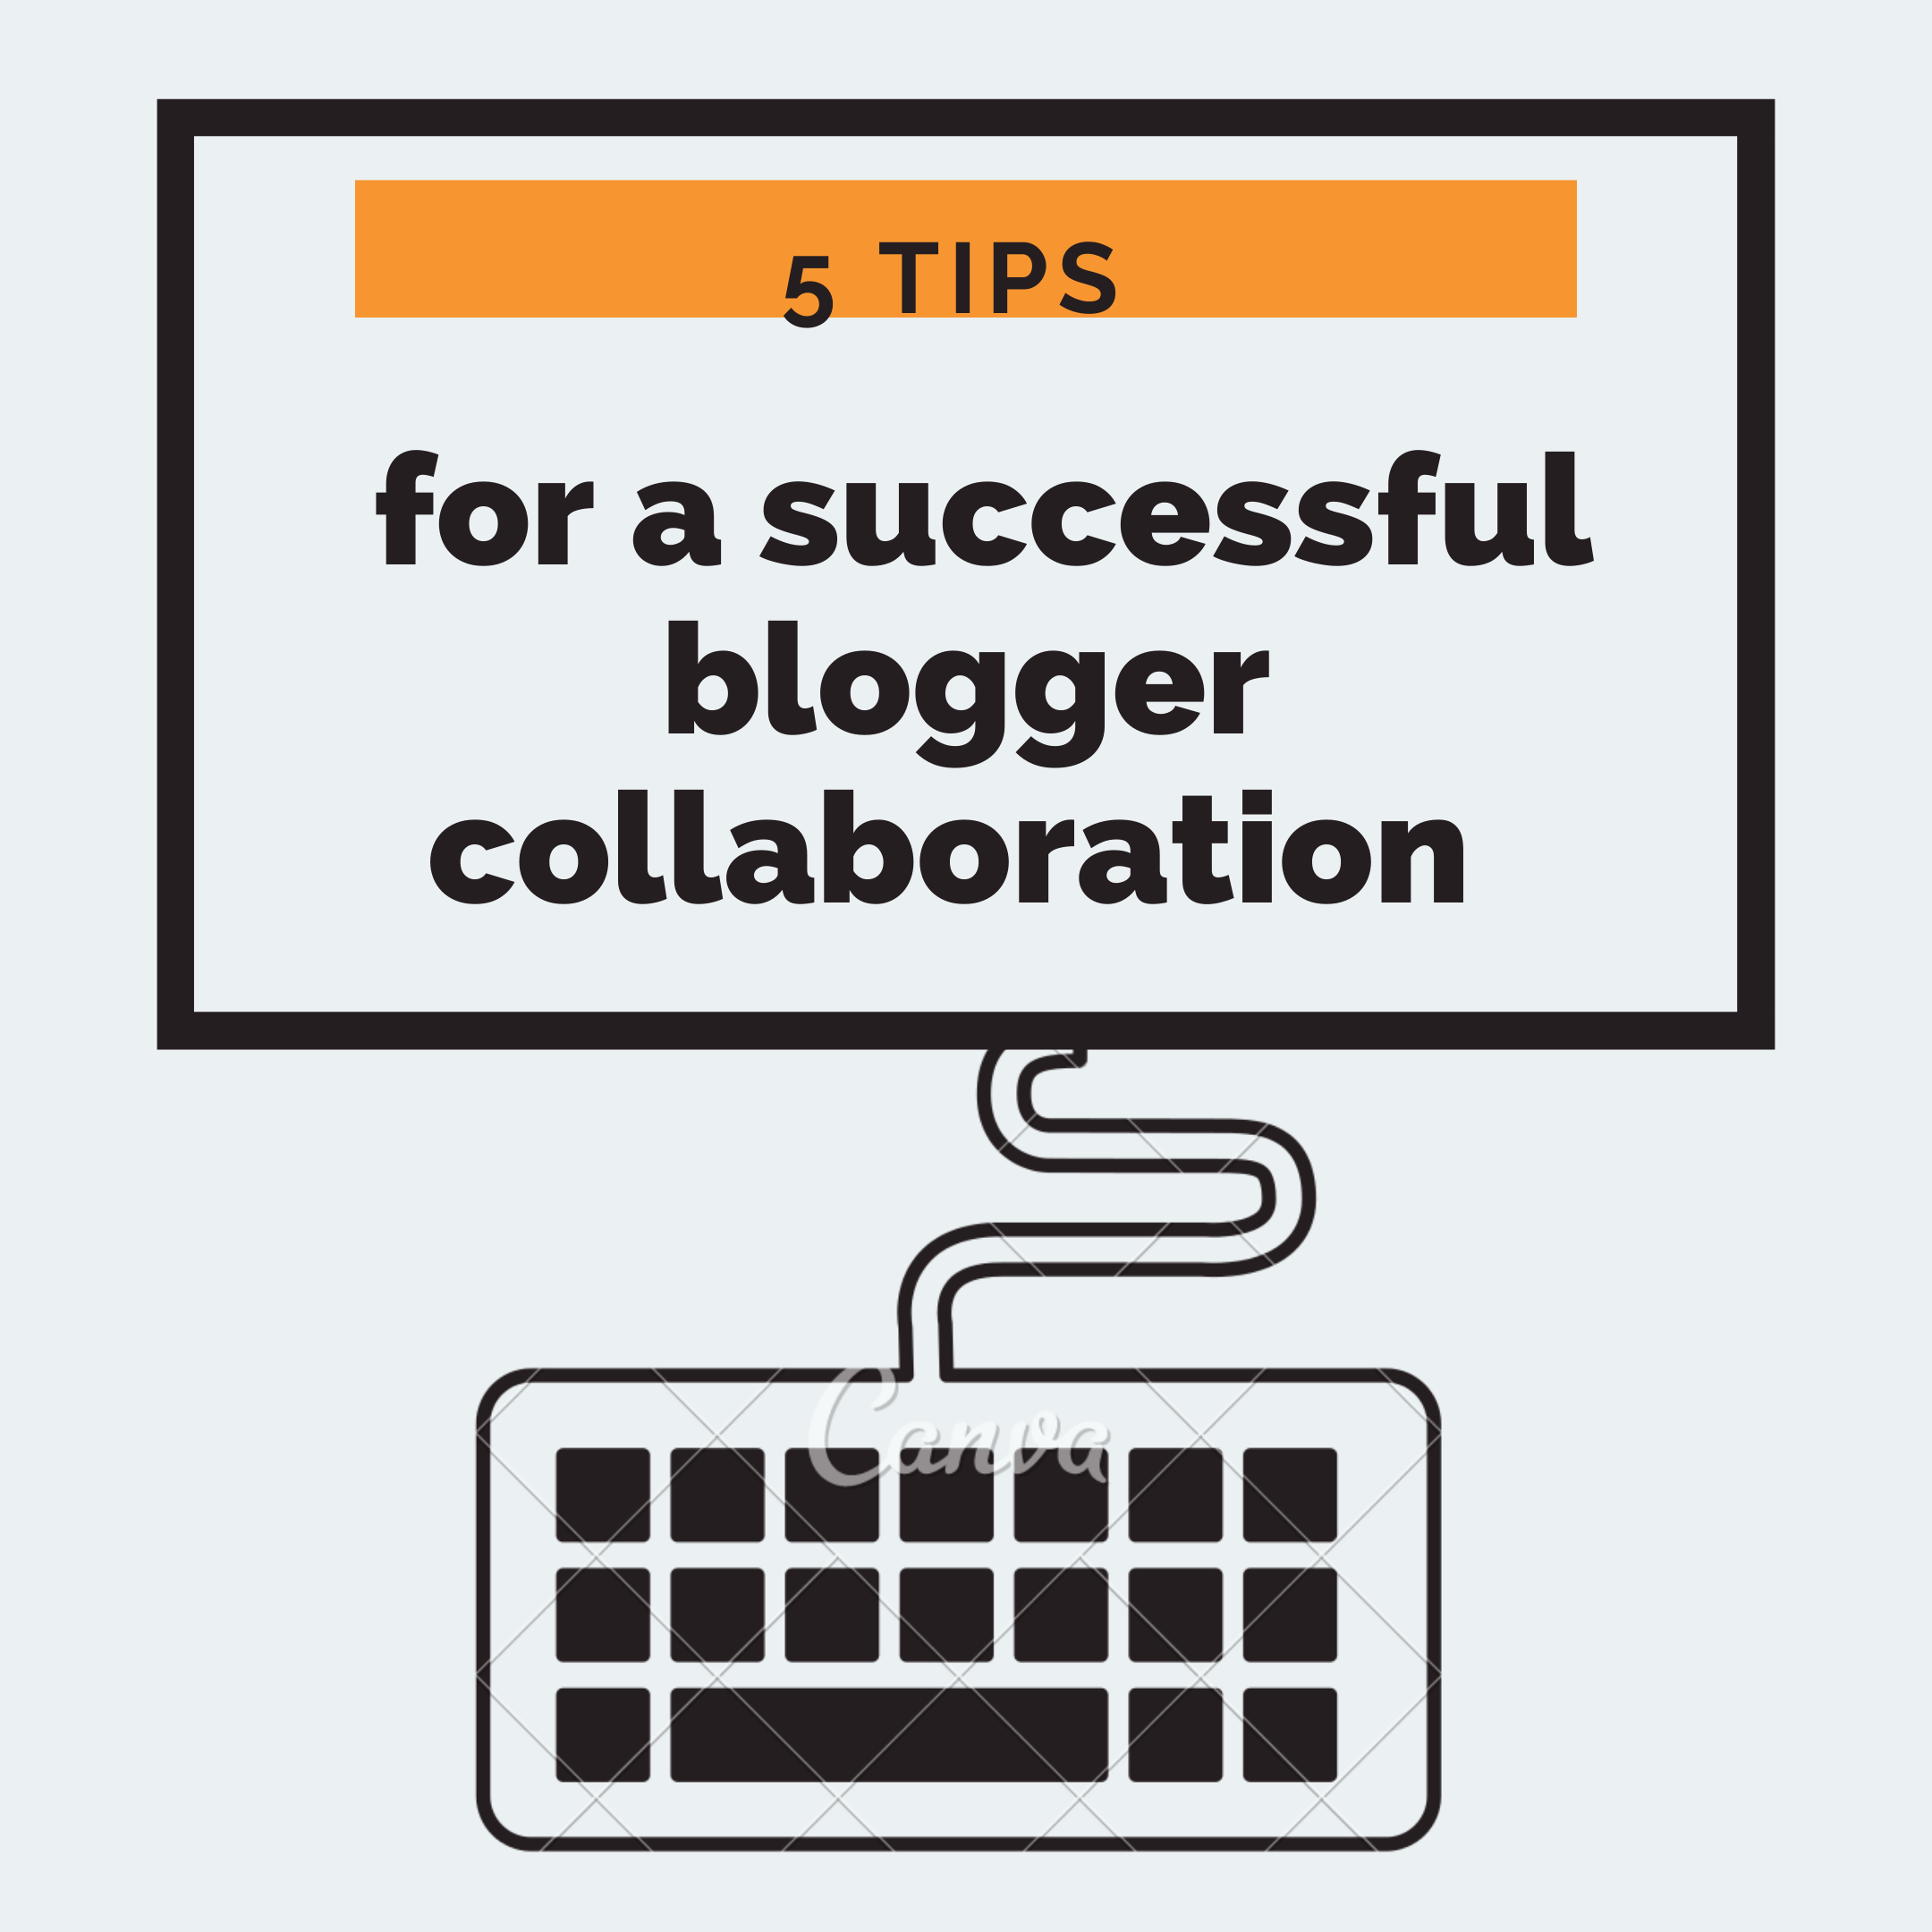 5 Tips for a Successful Blogger Collaboration